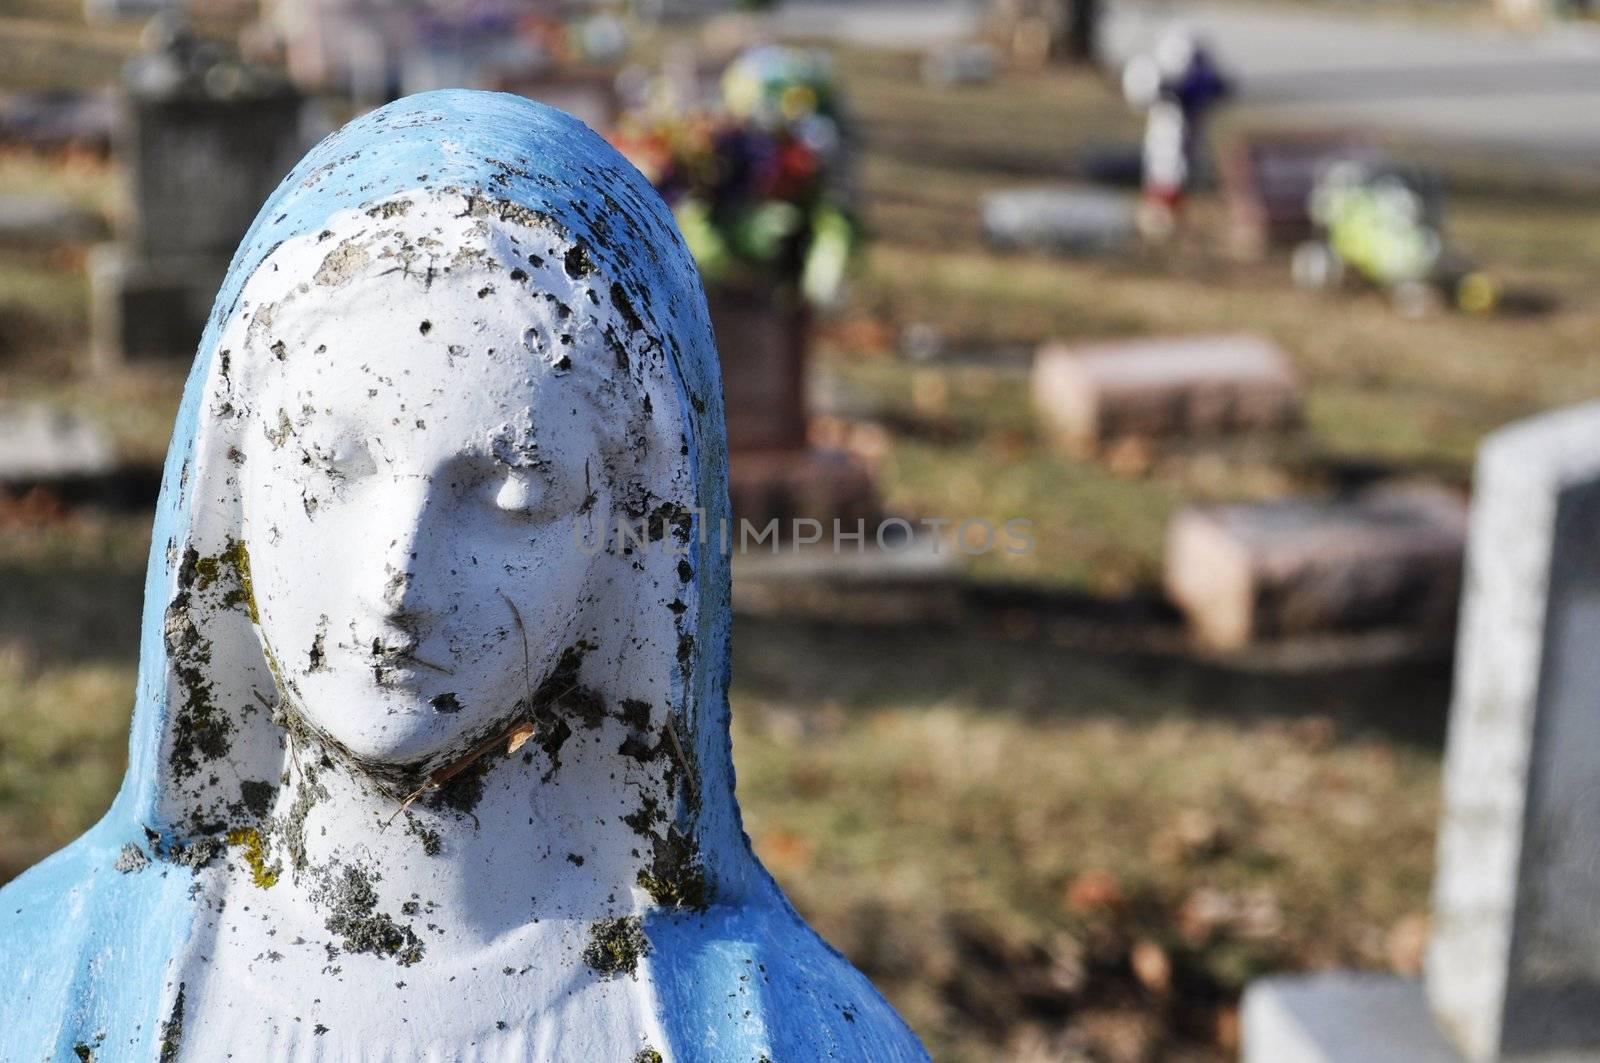 Gravesite - Mary statue - background - close-up by RefocusPhoto